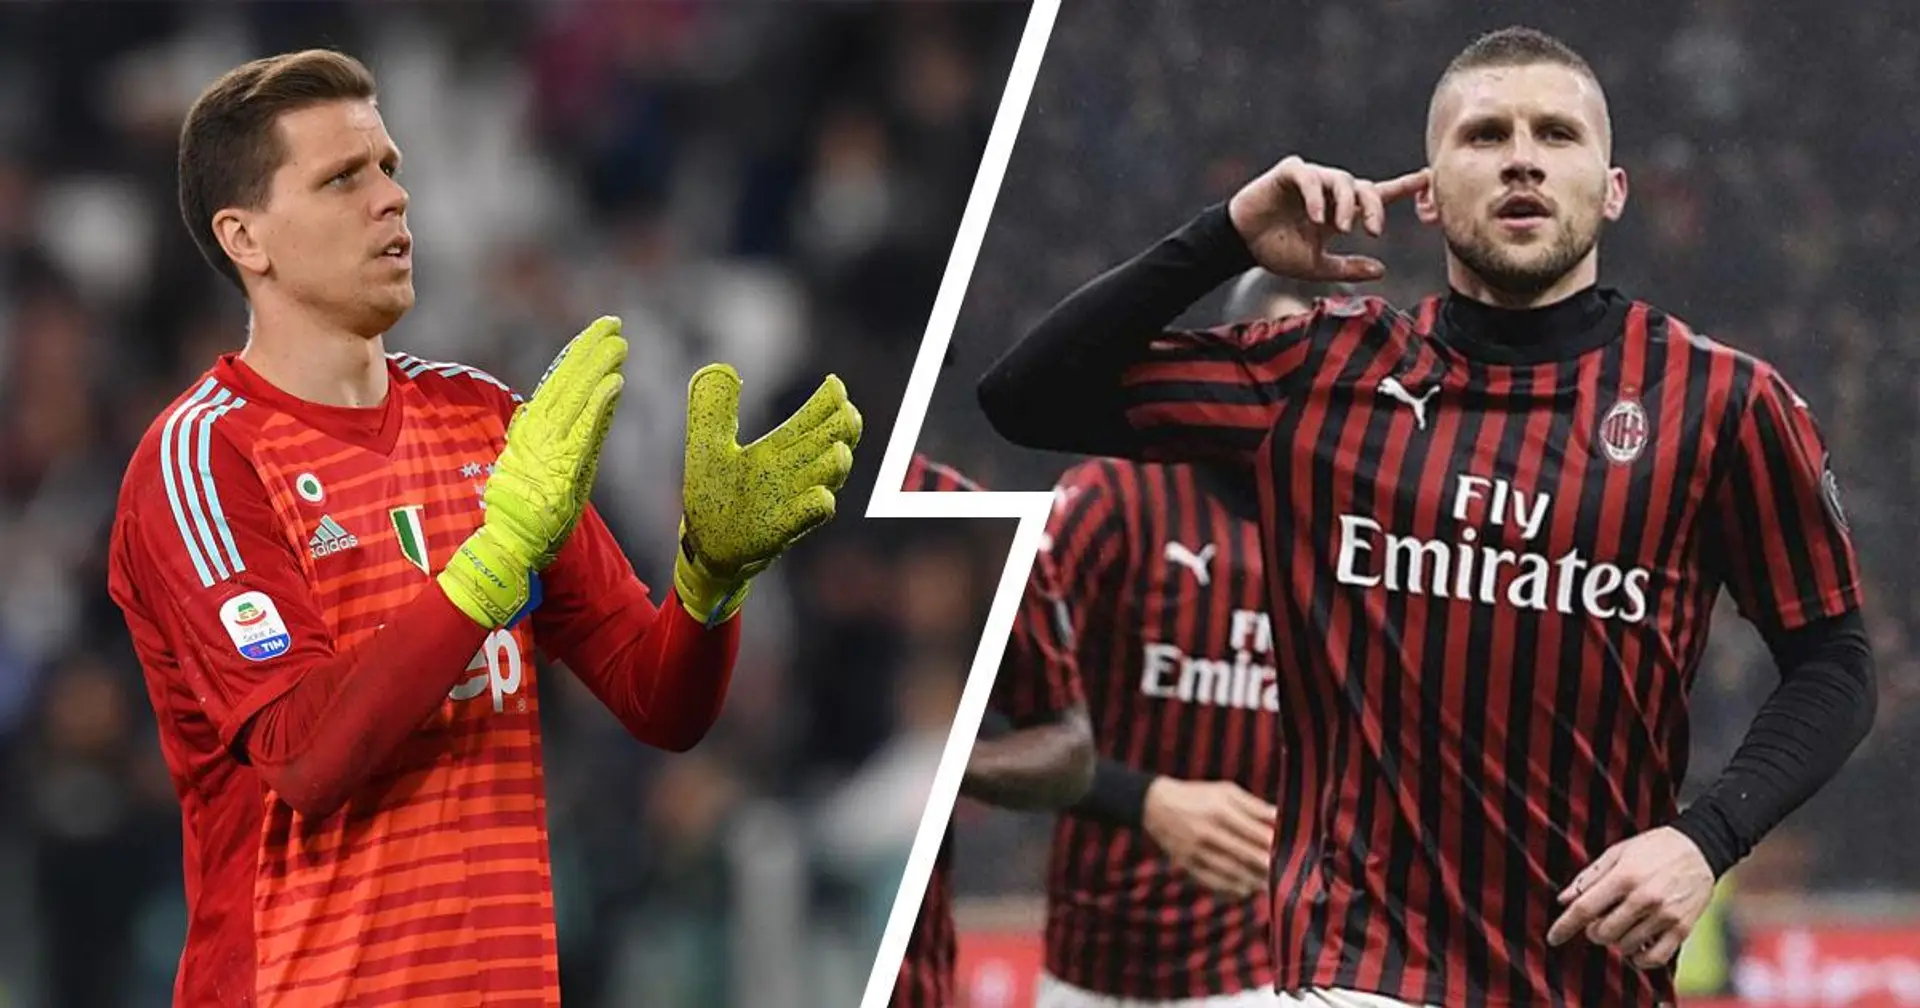 'You are losing 2-0, don’t act up': Wojciech Szczesny provokes Ante Rebic, ends up conceding 4 goals